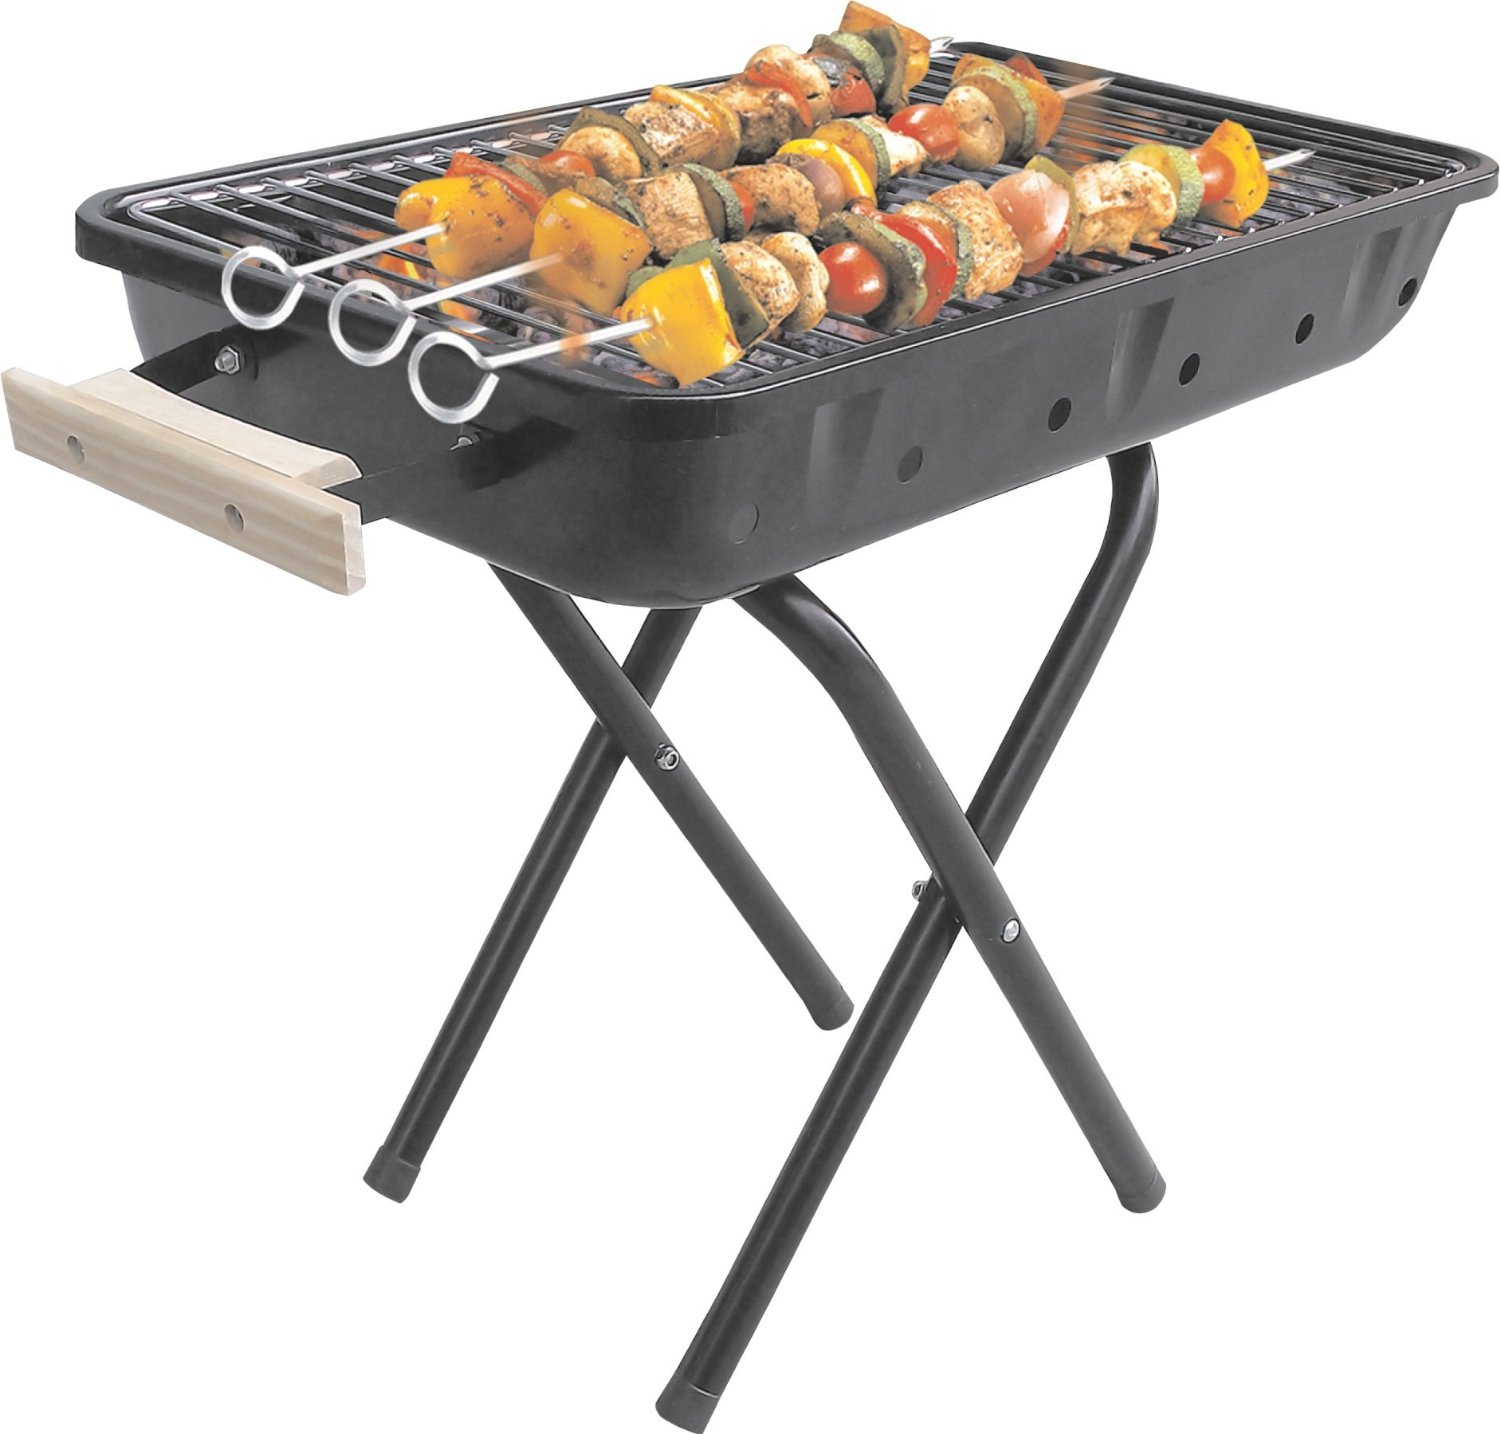 5 Types Of Grilling Equipment To Make Your Barbeque Party A